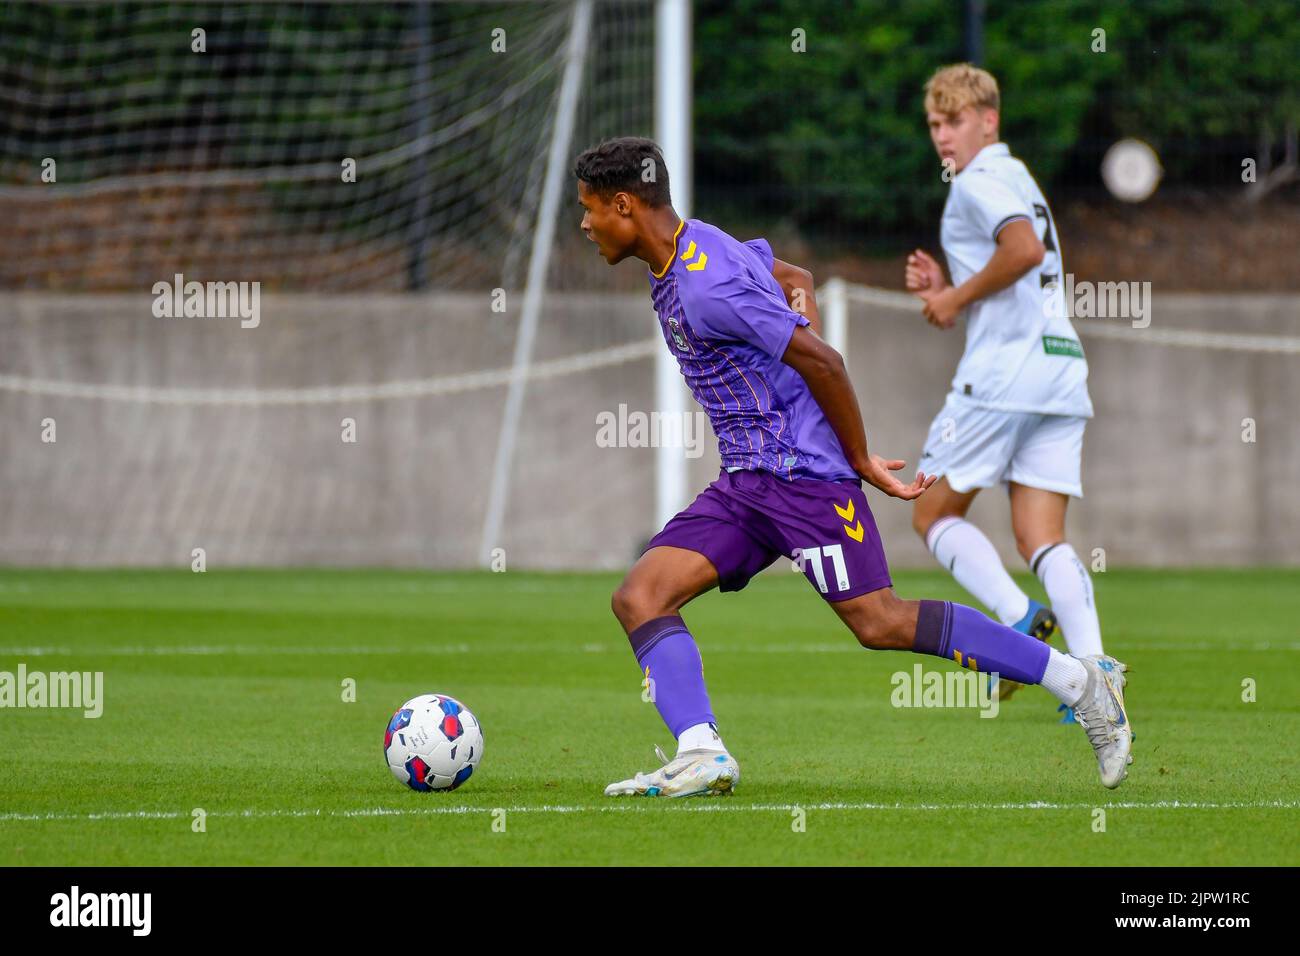 Swansea, Wales. 20 August 2022. Kai Andrews of Coventry City Under 18s in action during the Professional Development League game between Swansea City Under 18 and Coventry City  Under 18 at the Swansea City Academy in Swansea, Wales, UK on 20 August 2022. Credit: Duncan Thomas/Majestic Media/Alamy Live News. Stock Photo